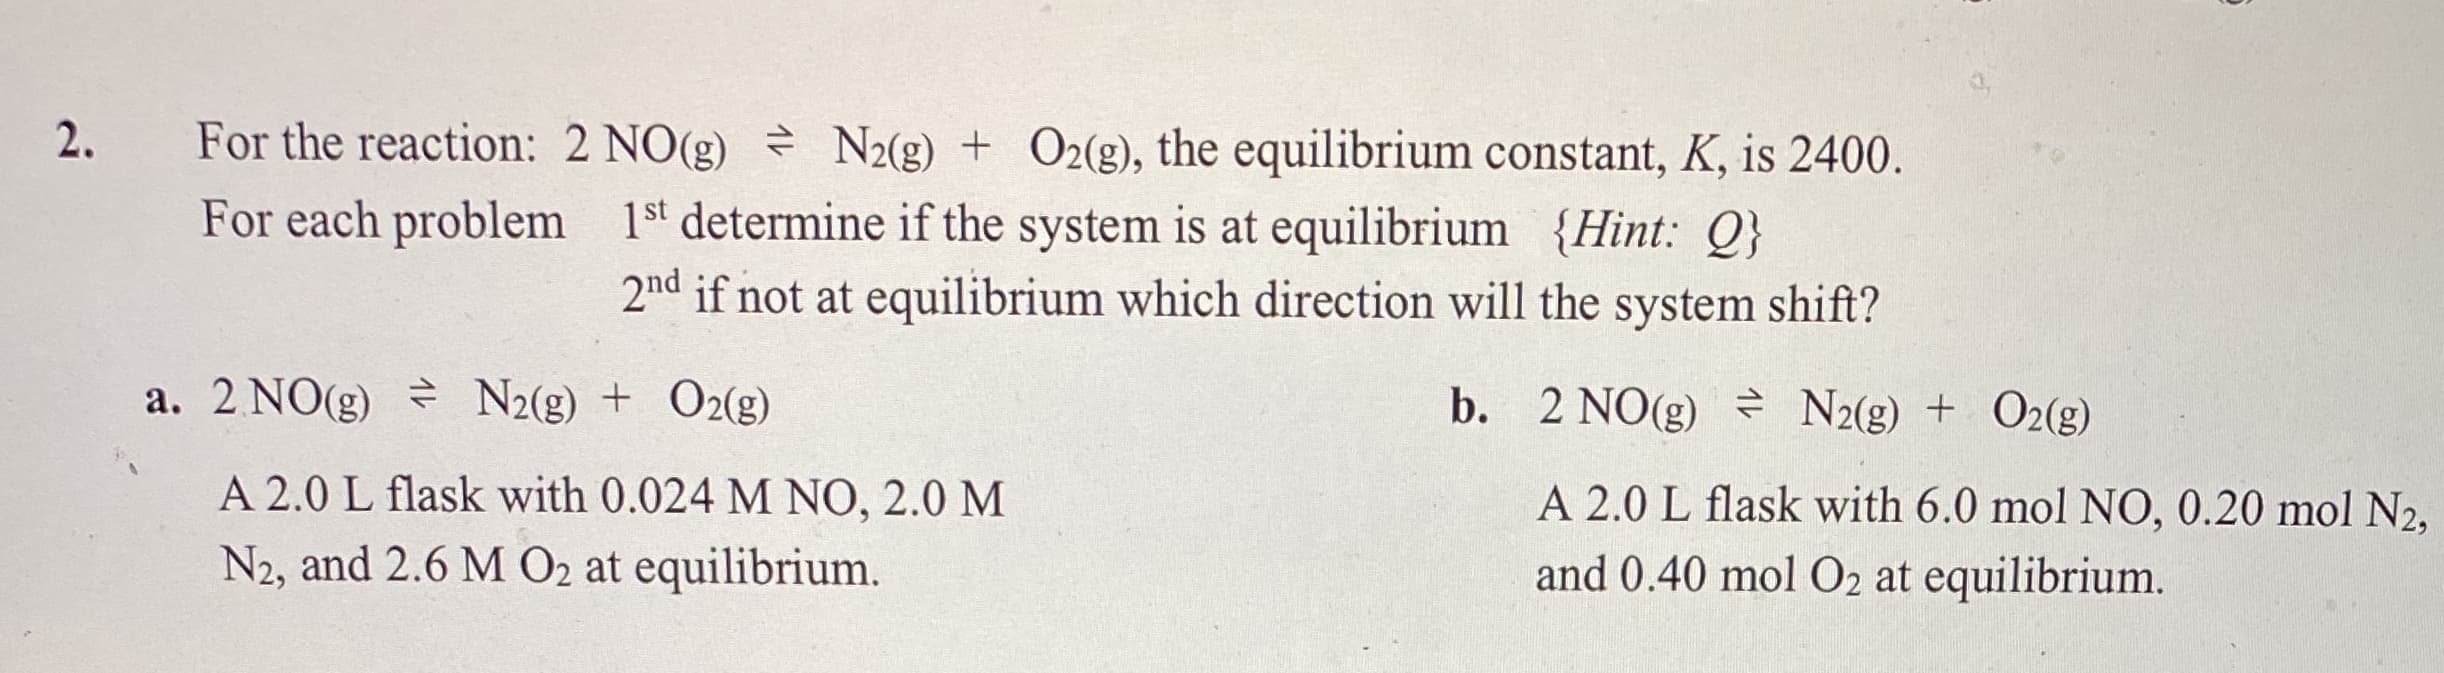 For the reaction: 2 NO(g) N2(g) + O2(g), the equilibrium constant, K, is 2400.
For each problem 1st determine if the system is at equilibrium {Hint: Q}
2nd if not at equilibrium which direction will the system shift?
a. 2 NO(g) N2(g) + O2(g)
b. 2 NO(g) N2(g) + O2(g)
A 2.0 L flask with 0.024 M NO, 2.0 M
A 2.0 L flask with 6.0 mol NO, 0.20 mol N2,
and 0.40 mol O2 at equilibrium.
N2, and 2.6 M O2 at equilibrium.
